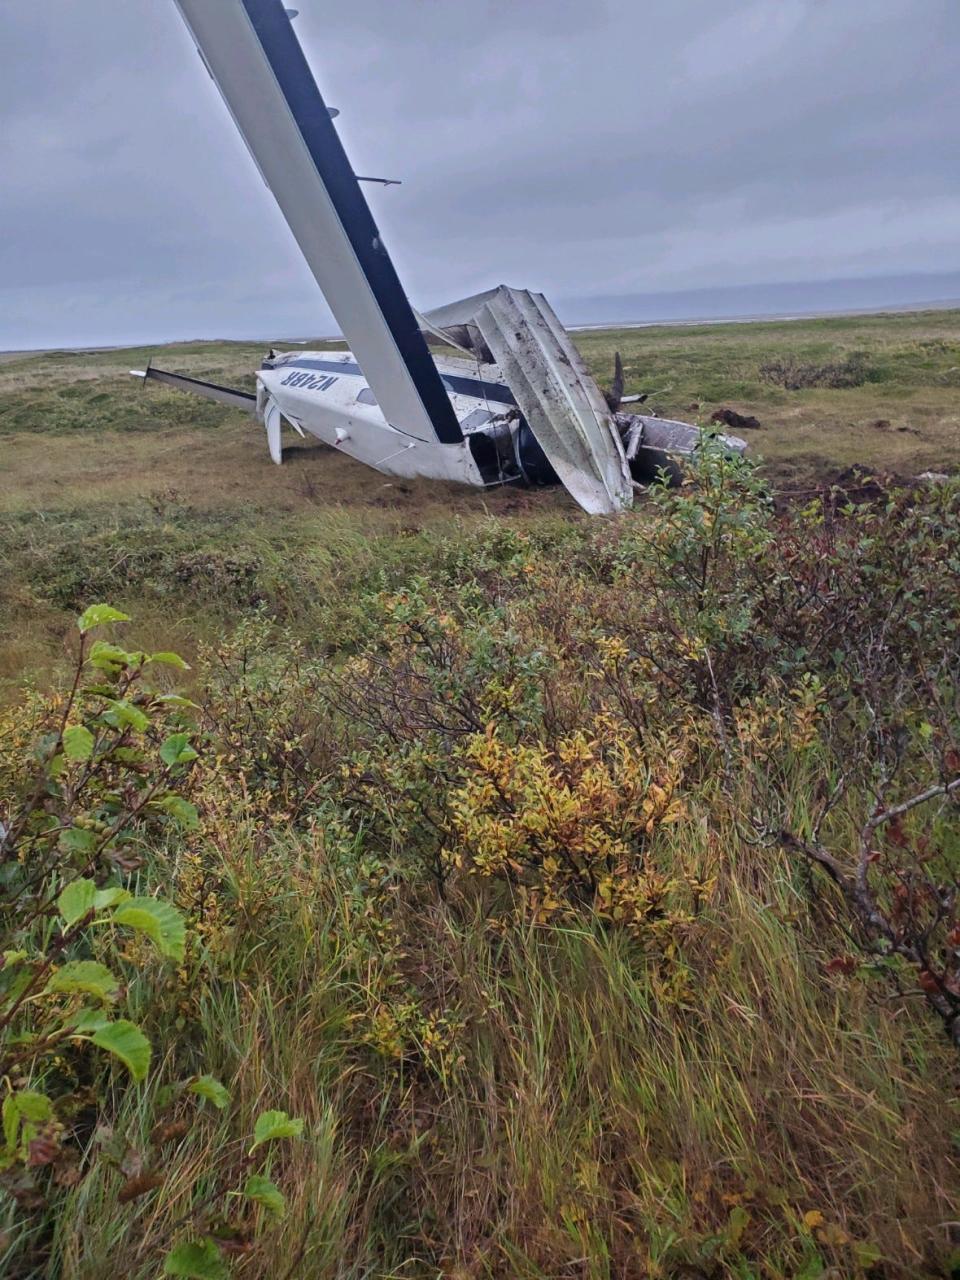 The float plane carrying Casey West and Cal Stefanko crashed in Alaska on Sept. 18. The Michigan friends sustained minor injuries, while their pilot escaped with cuts to his head requiring 17 stitches.